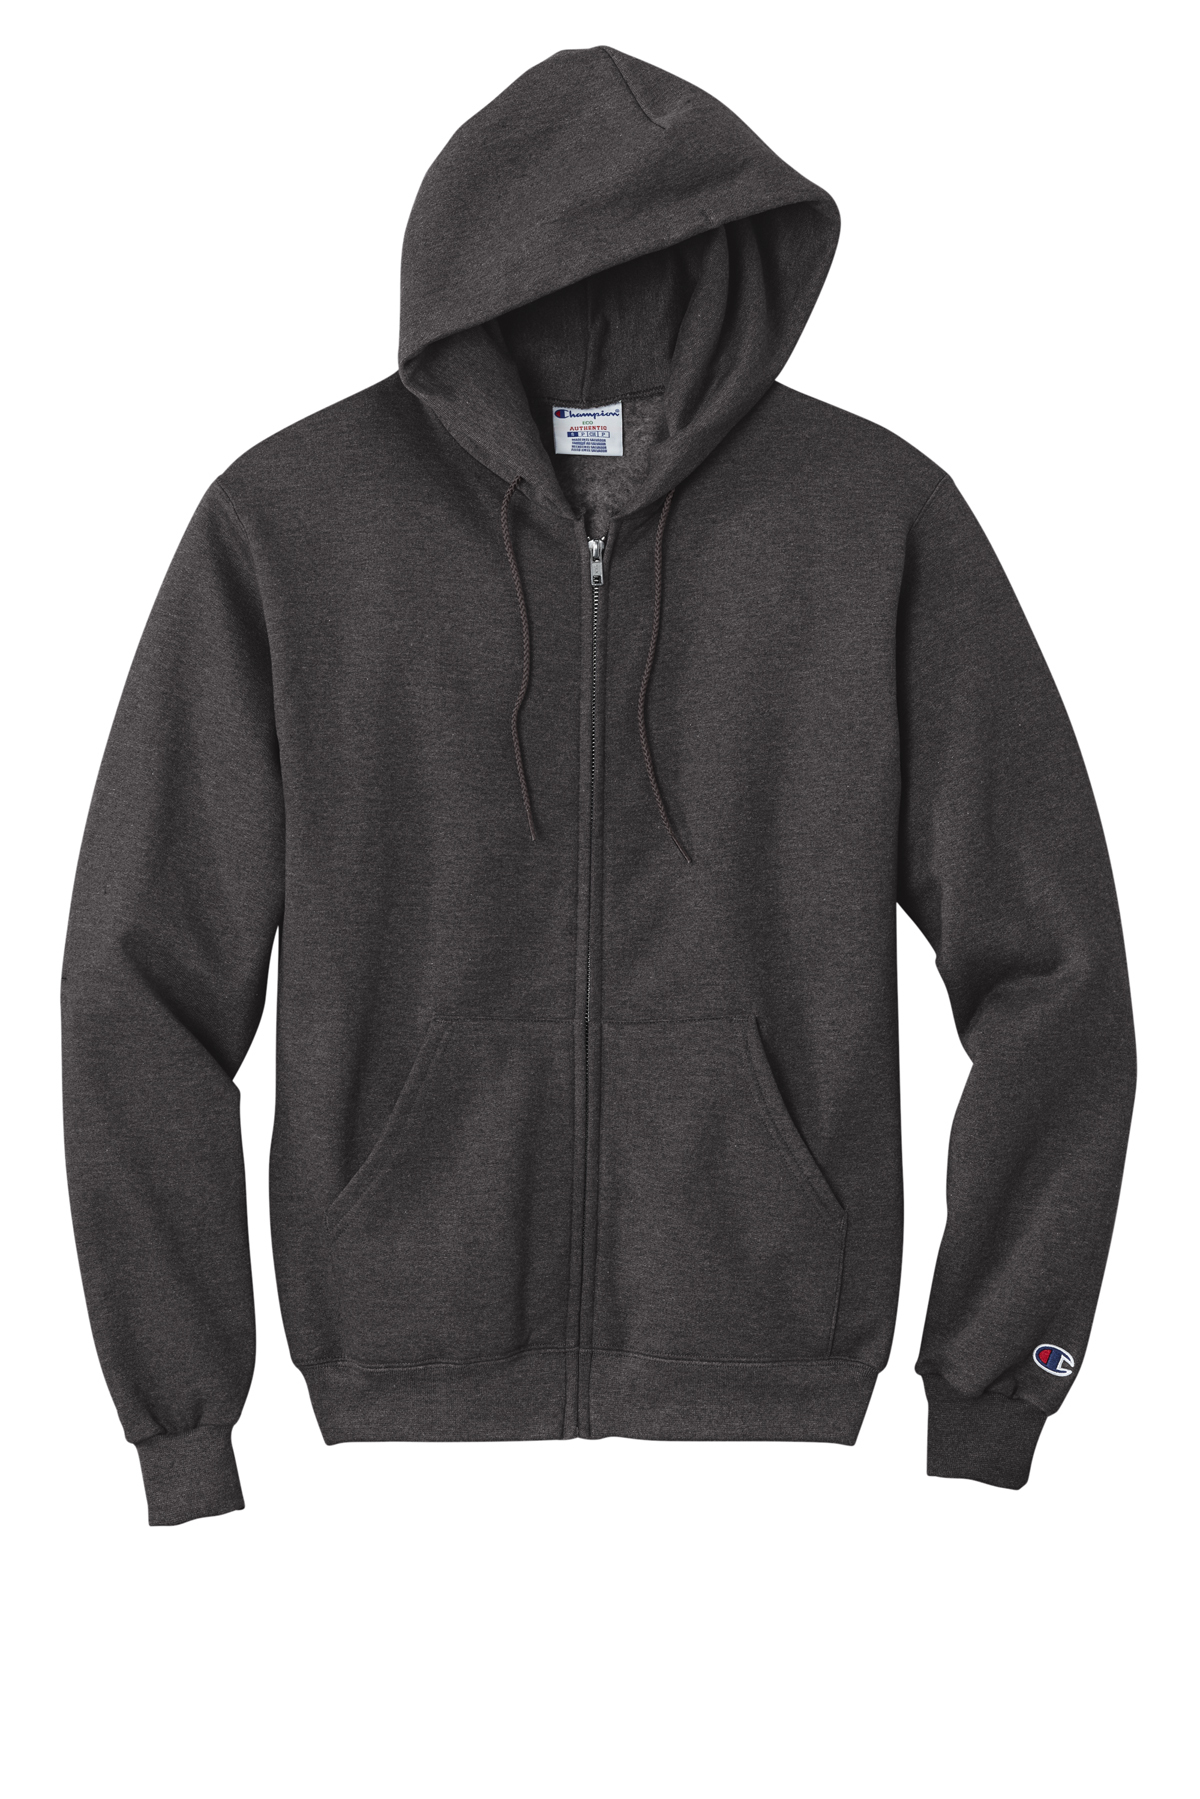 Champion Powerblend Full-Zip Hoodie | Product | Company Casuals